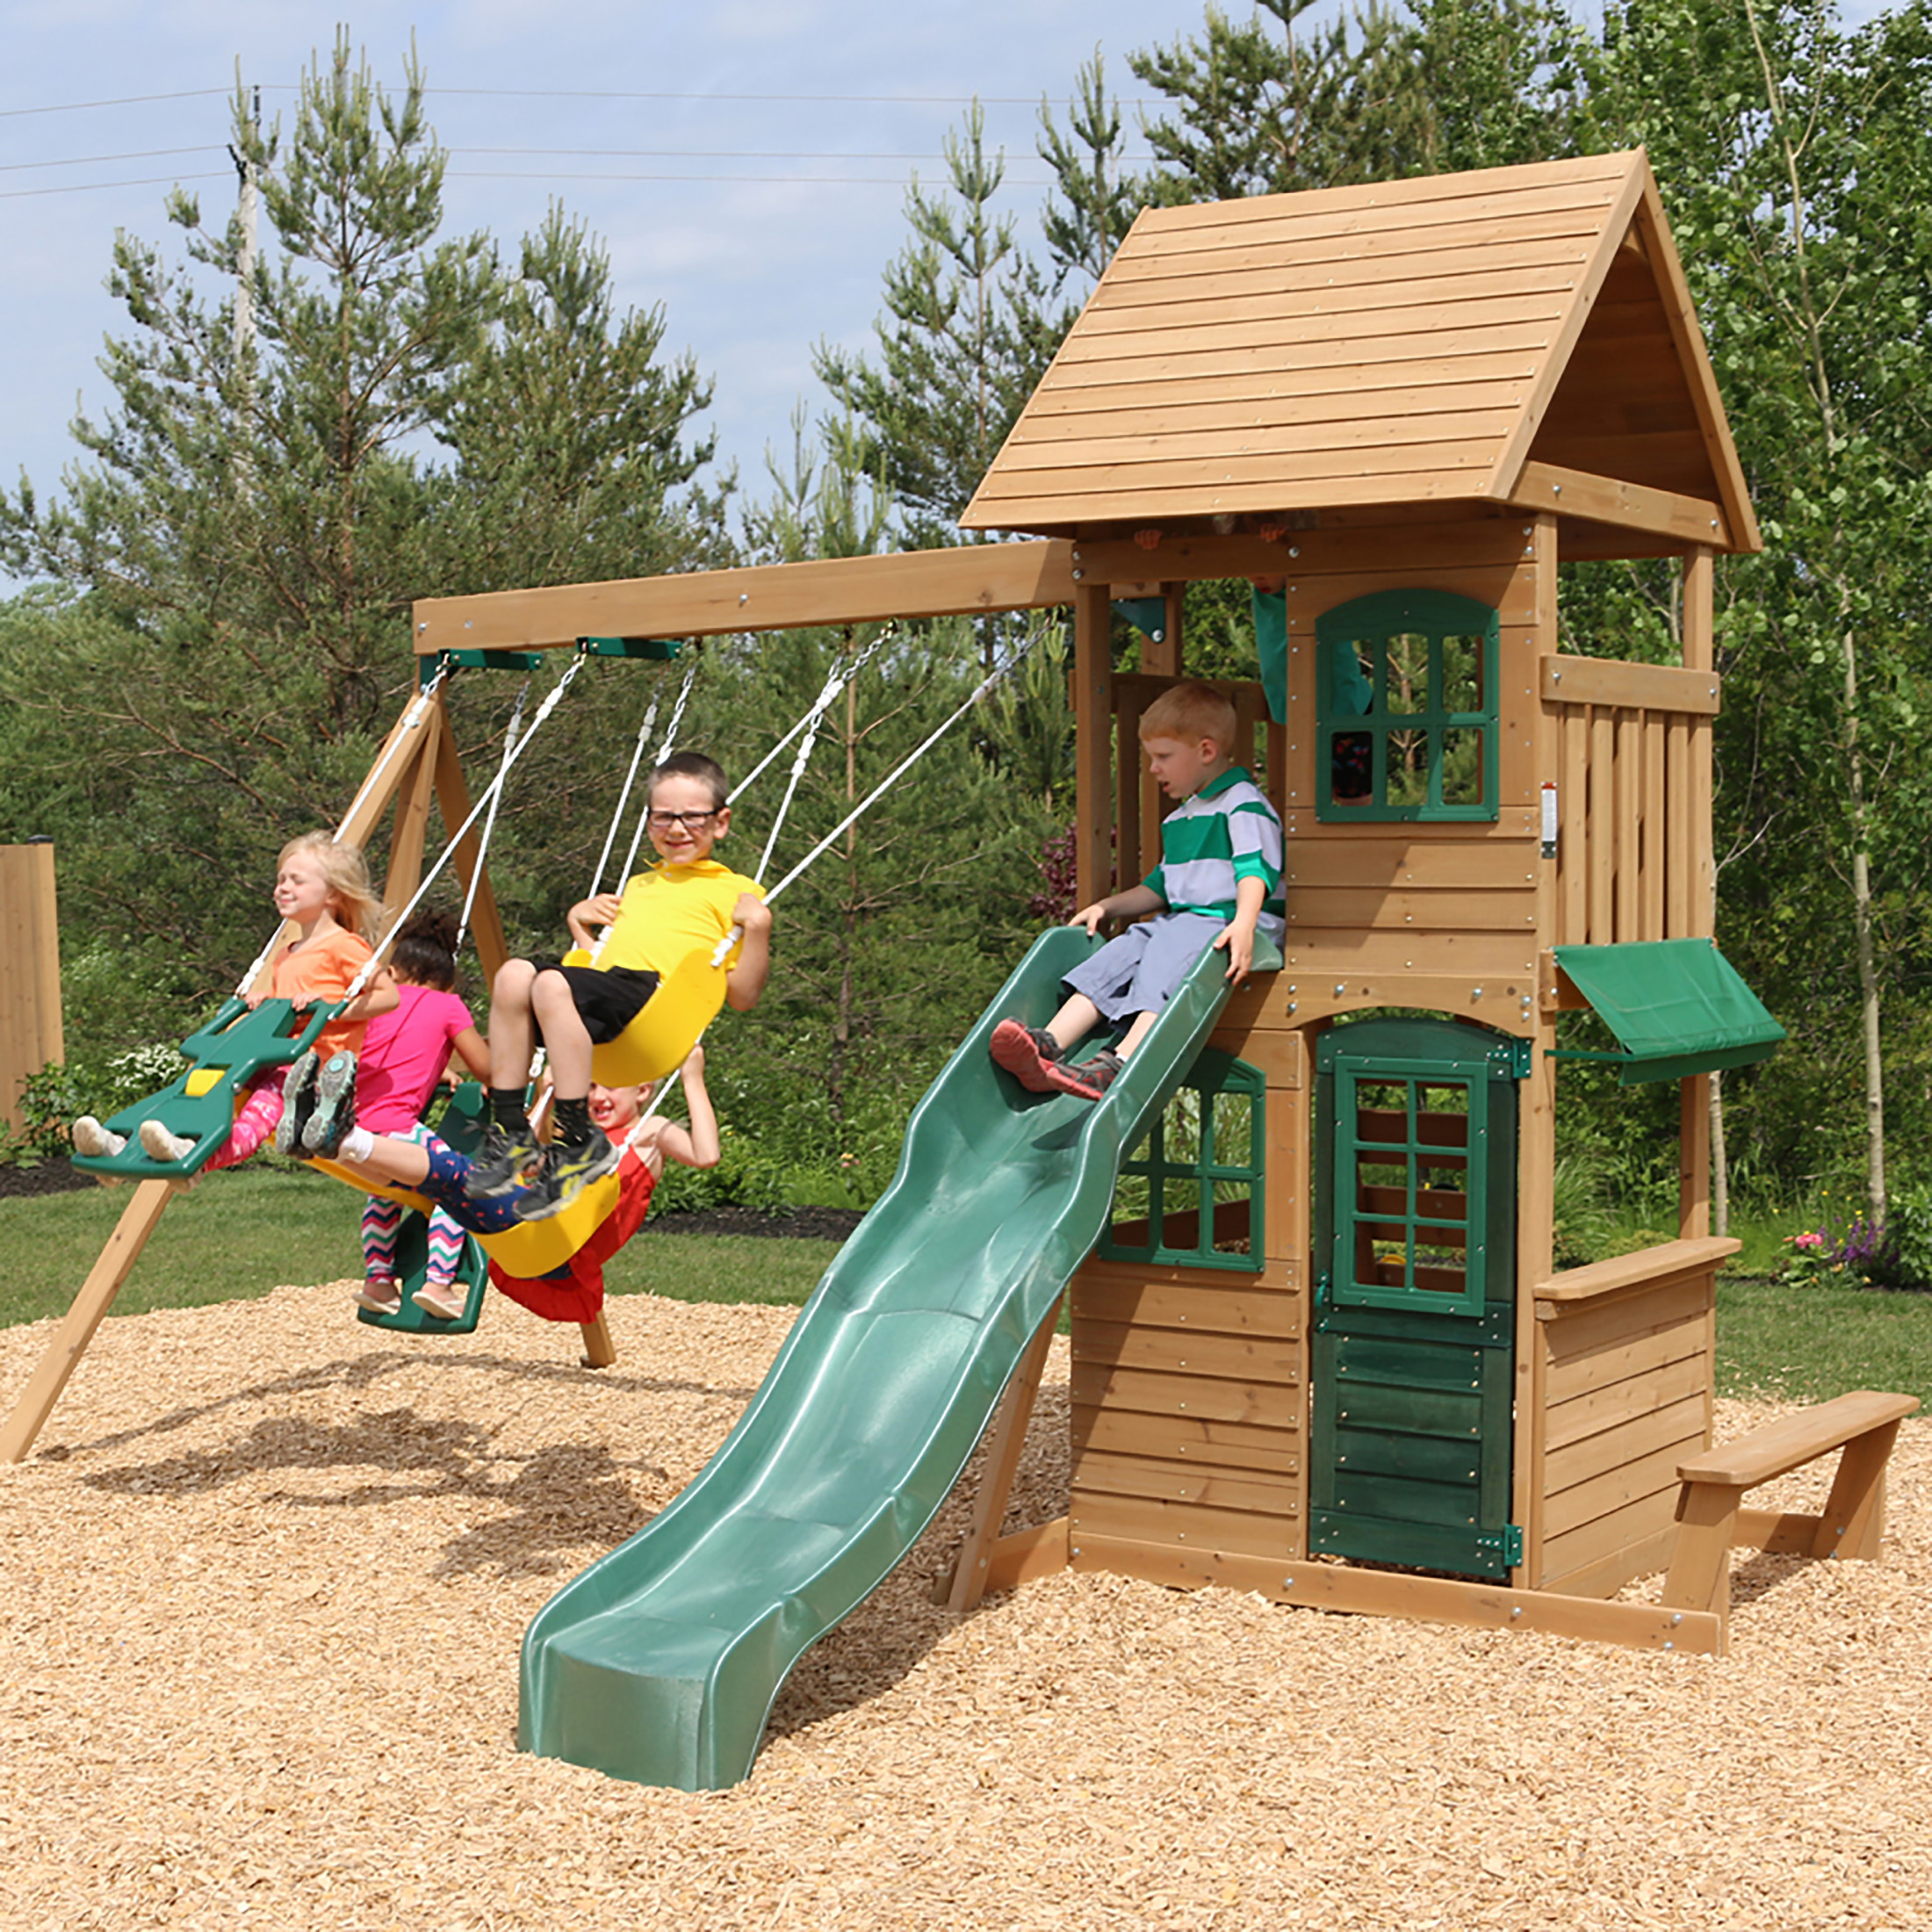 KidKraft Windale Wooden Swing Set / Playset with Clubhouse, Swings, Slide, Shaded Table and Bench - image 1 of 12